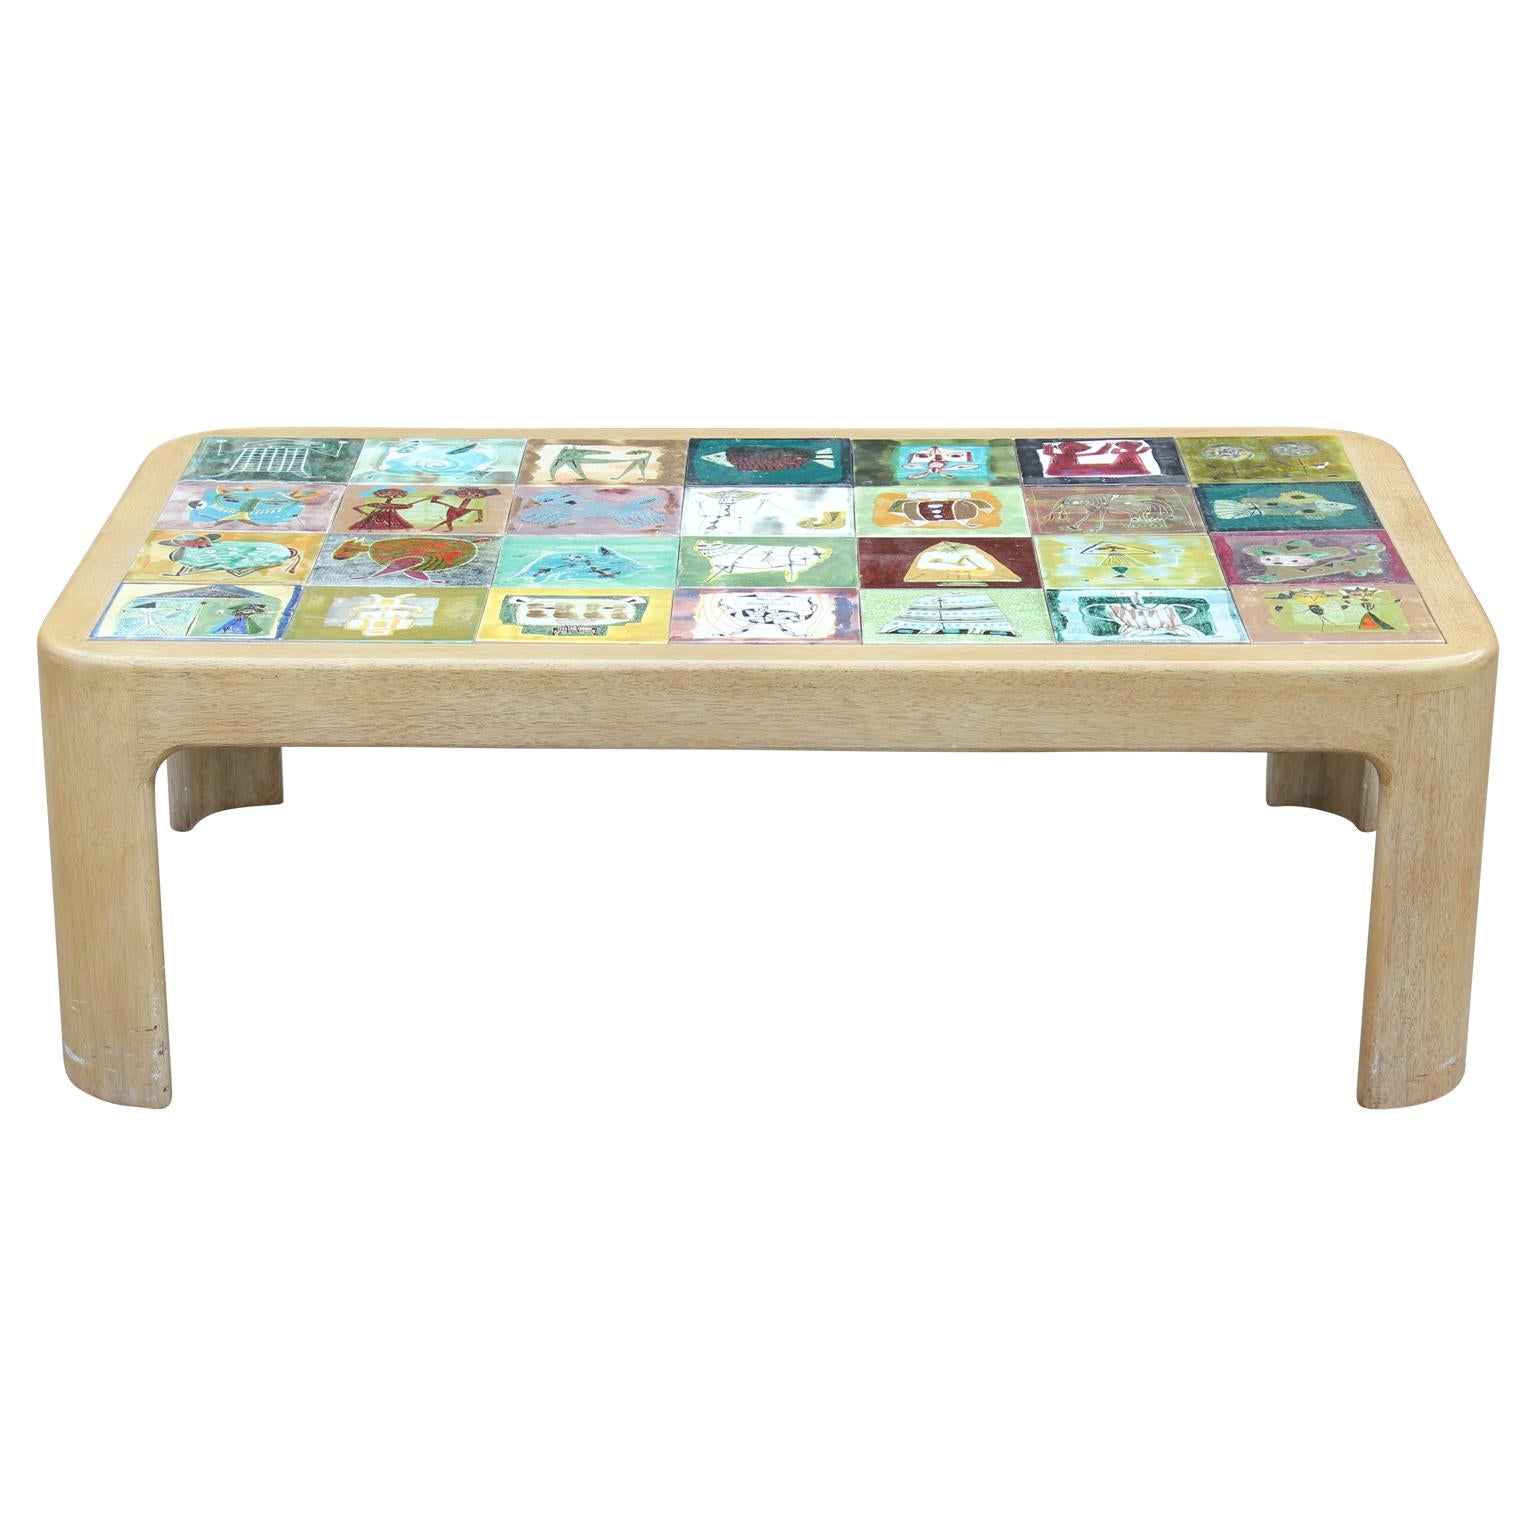 Modern Whimsical Roger Capron Style Colorful Hand Painted Tiled Coffee Table